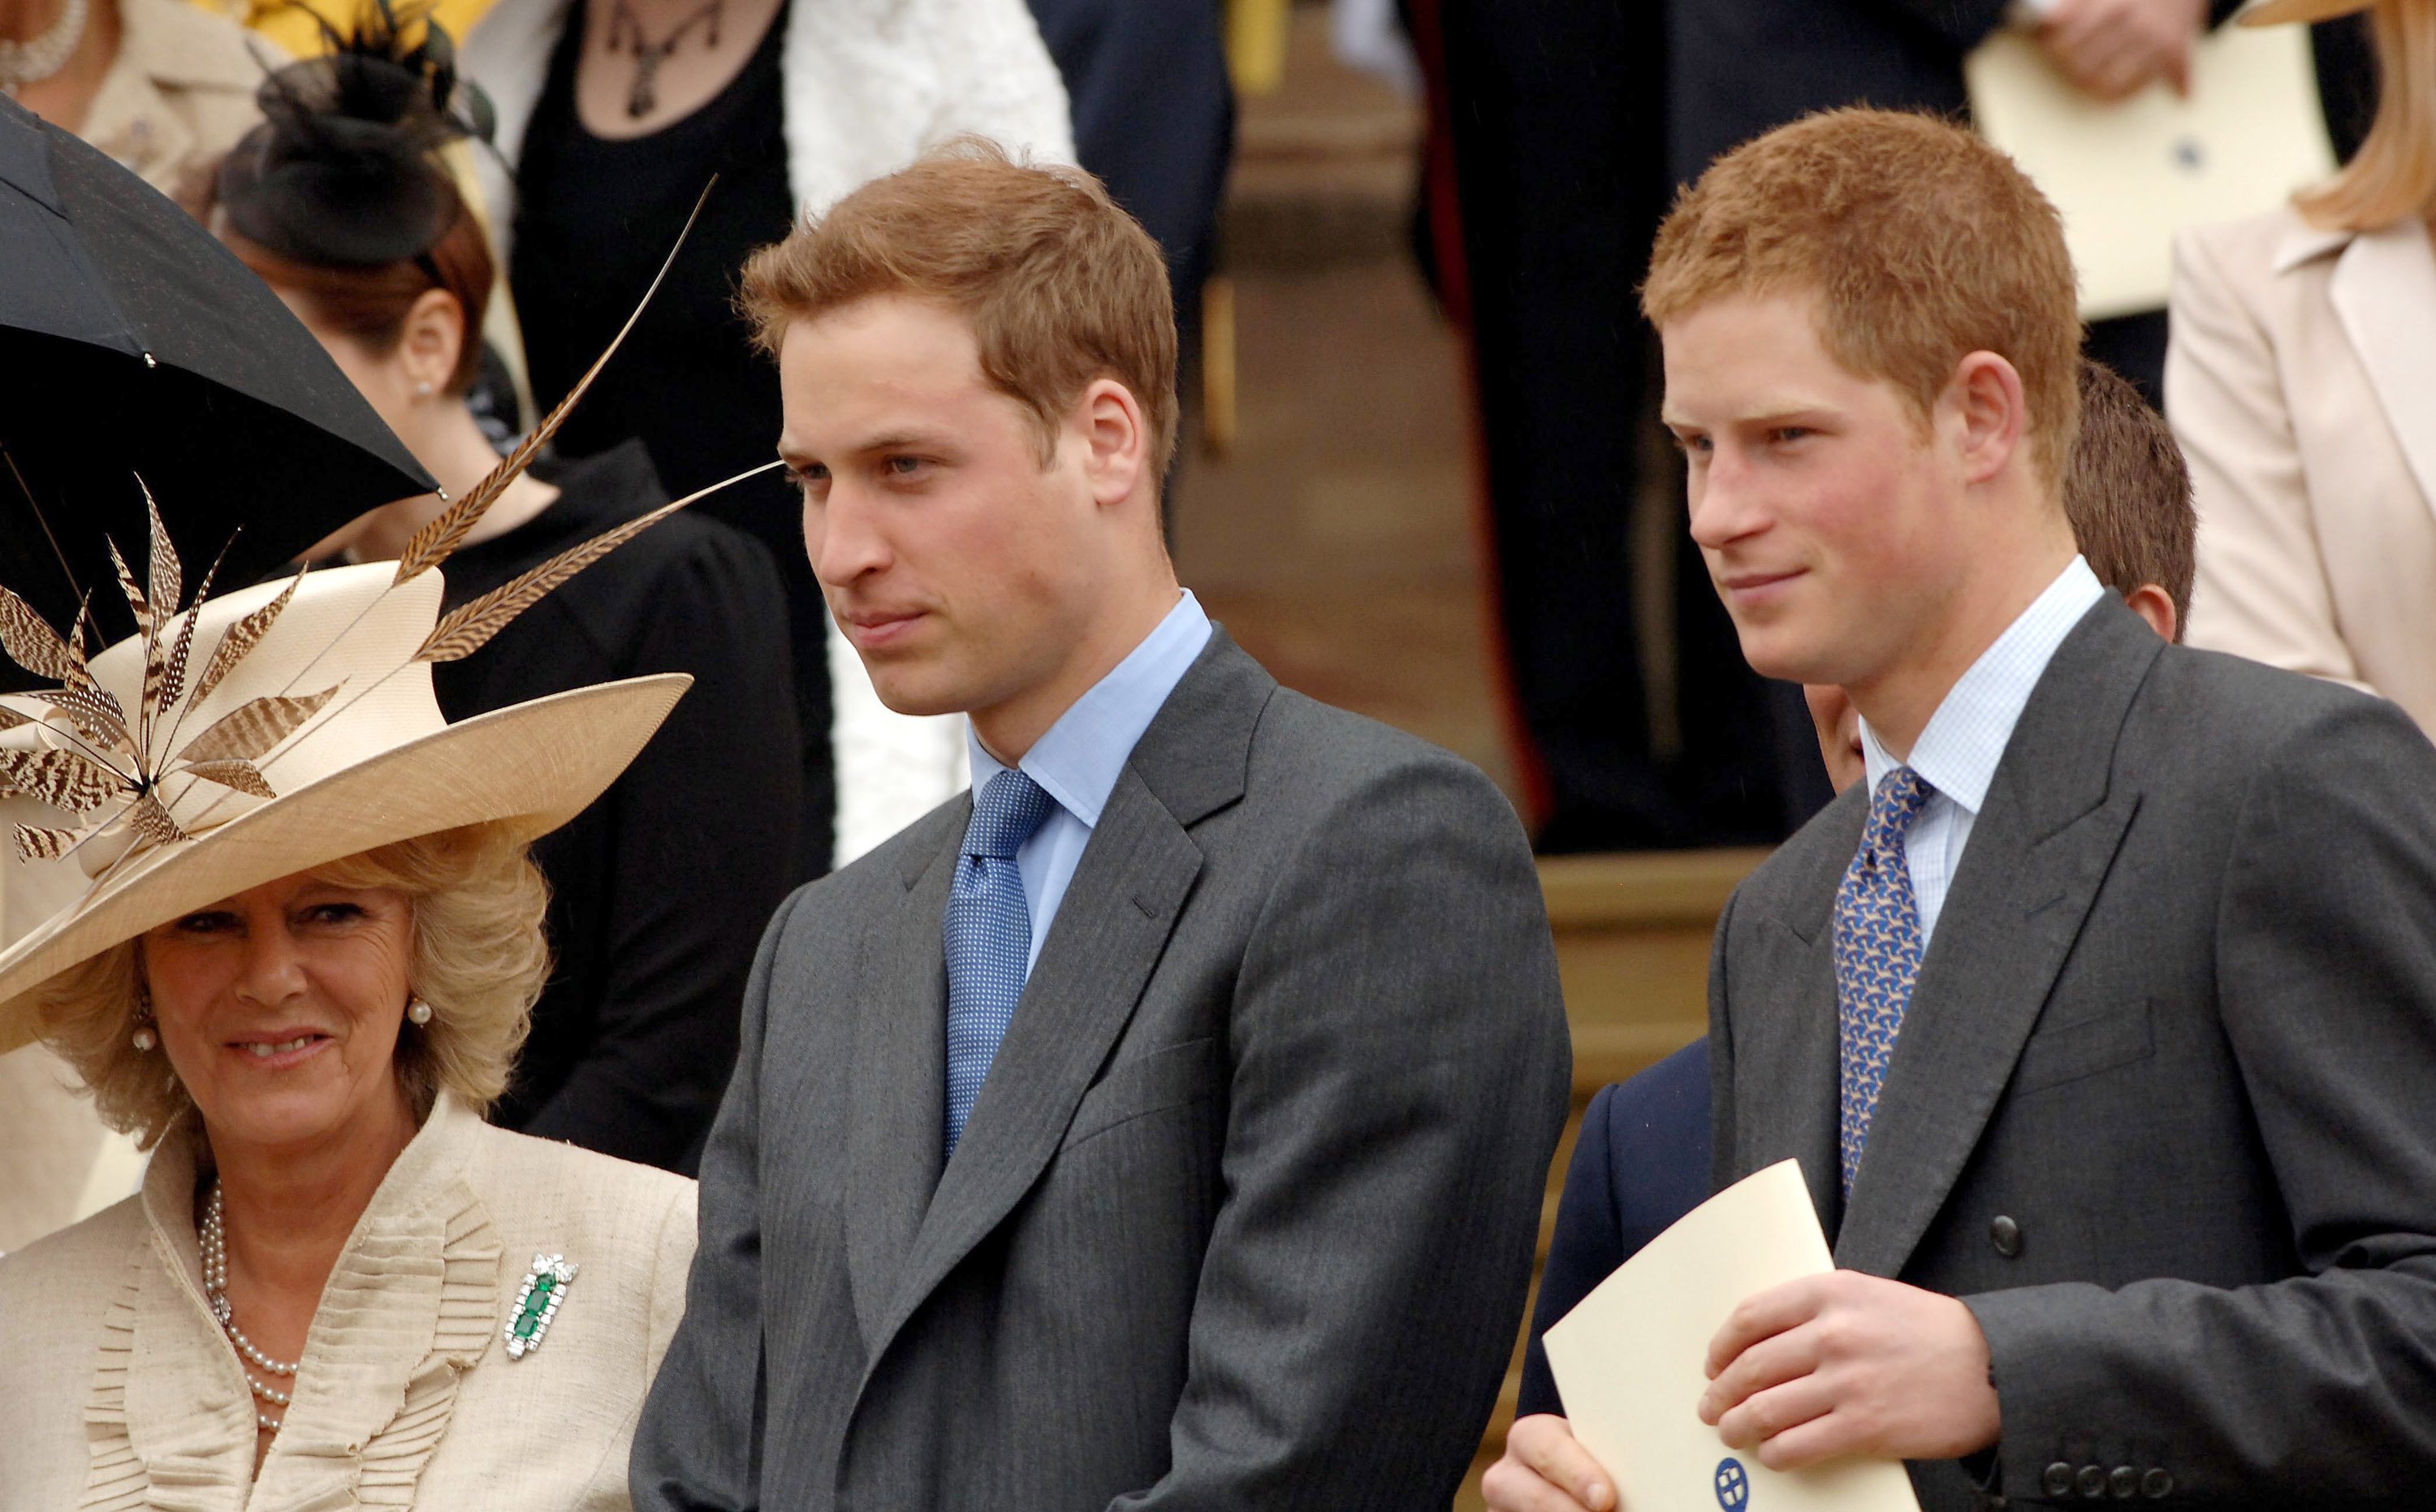 Camilla Parker Bowles, Duchess of Cornwall, Prince William and Prince Harry stand on the steps of St. George's Chapel, Windsor, following the Service of Thanksgiving for the Queen's 80th birthday on April 23, 2006 | Source: Getty Images